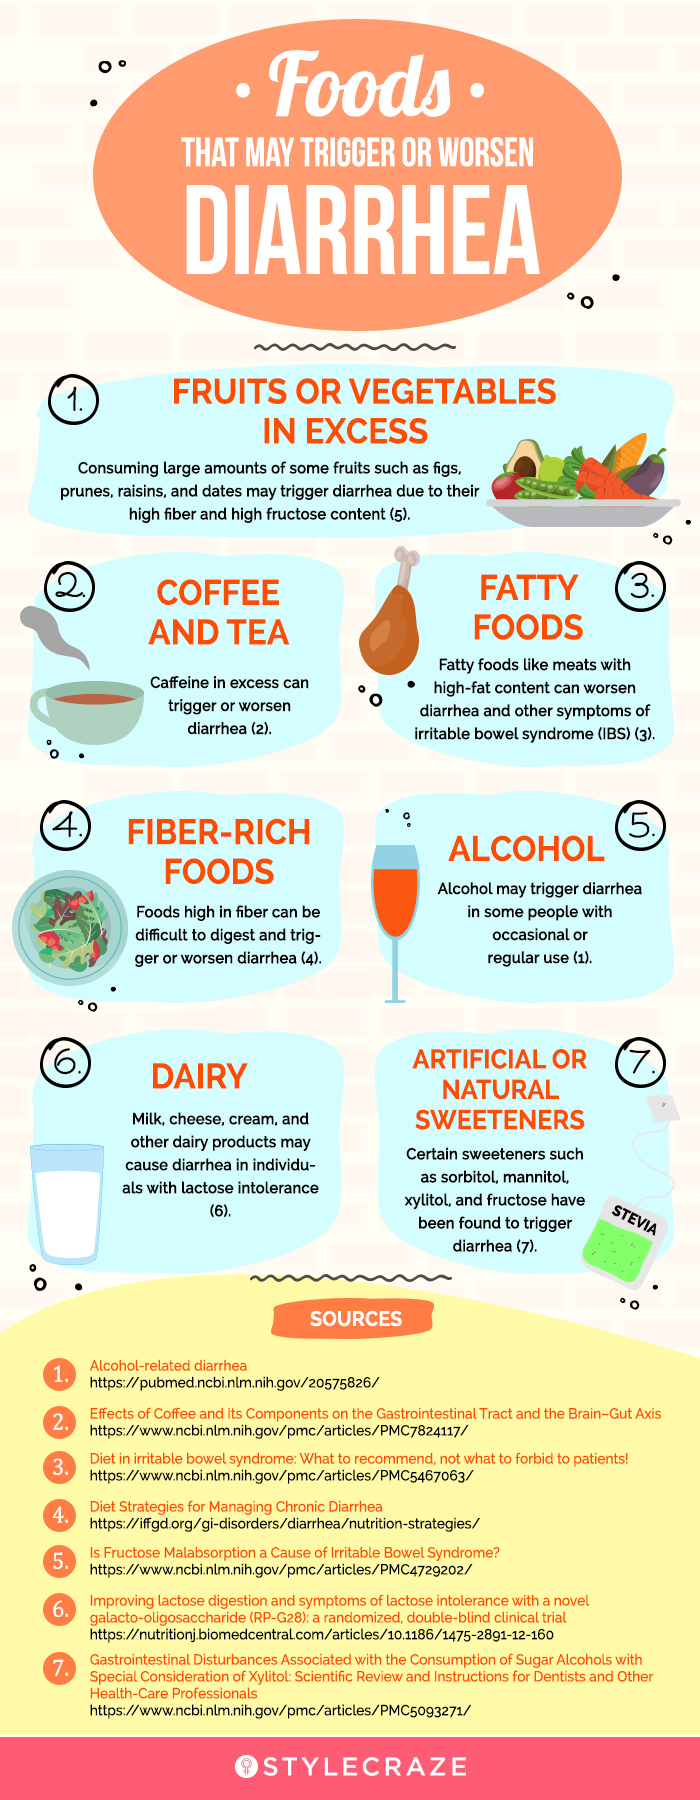 foods that may trigger or worsen diarrhea [infographic]